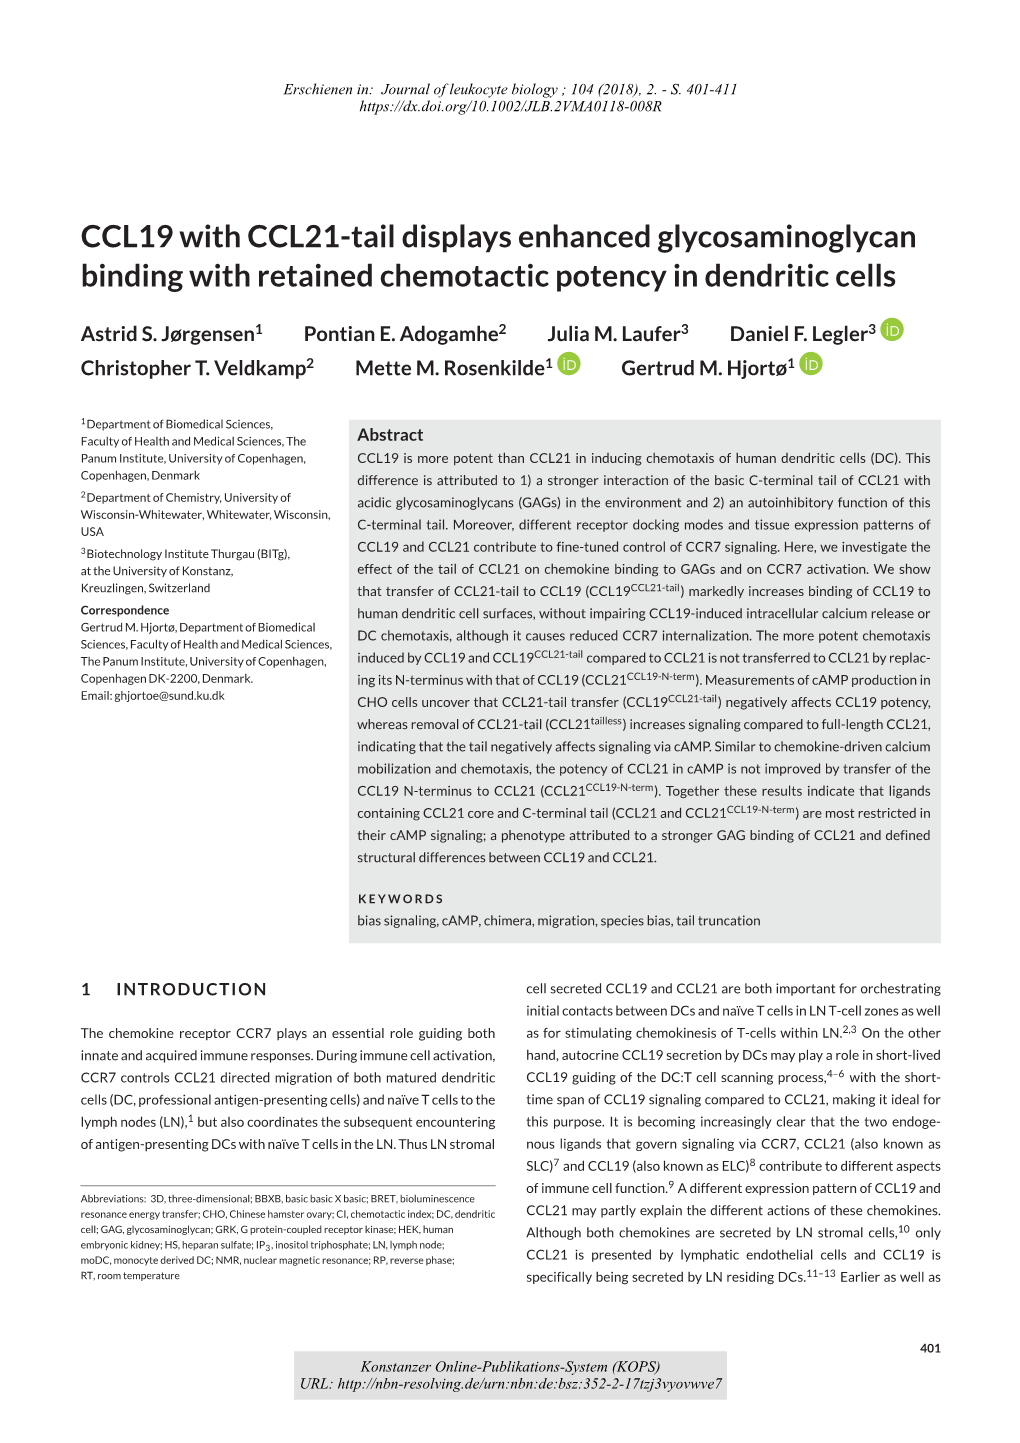 CCL19 with CCL21-Tail Displays Enhanced Glycosaminoglycan Binding with Retained Chemotactic Potency in Dendritic Cells